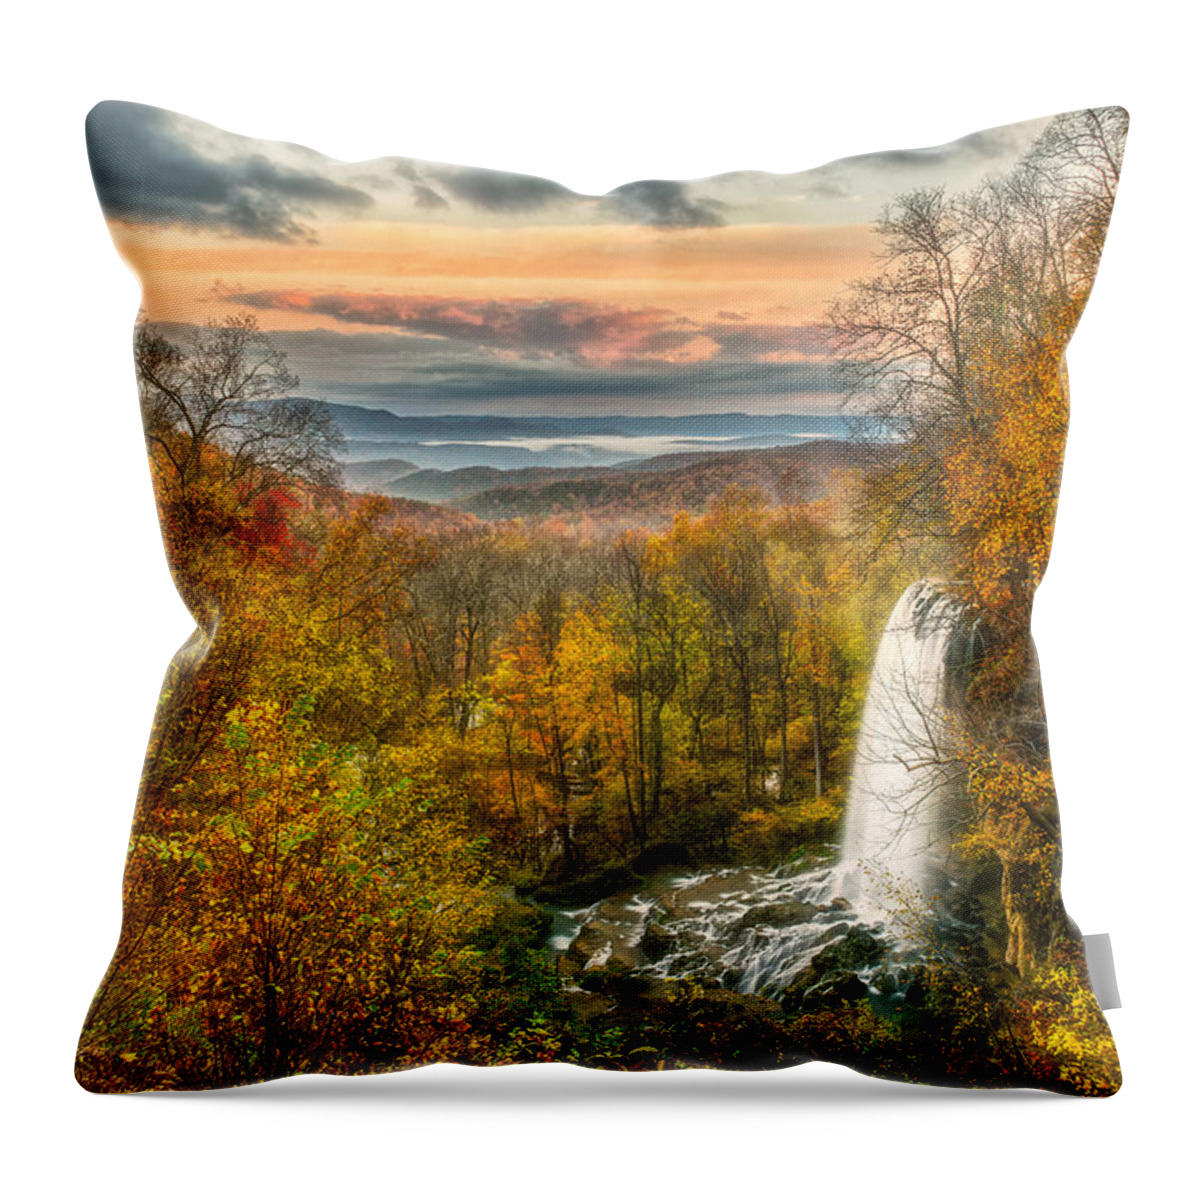 Waterfalls Throw Pillow featuring the photograph Falling Spring Falls by Russell Pugh